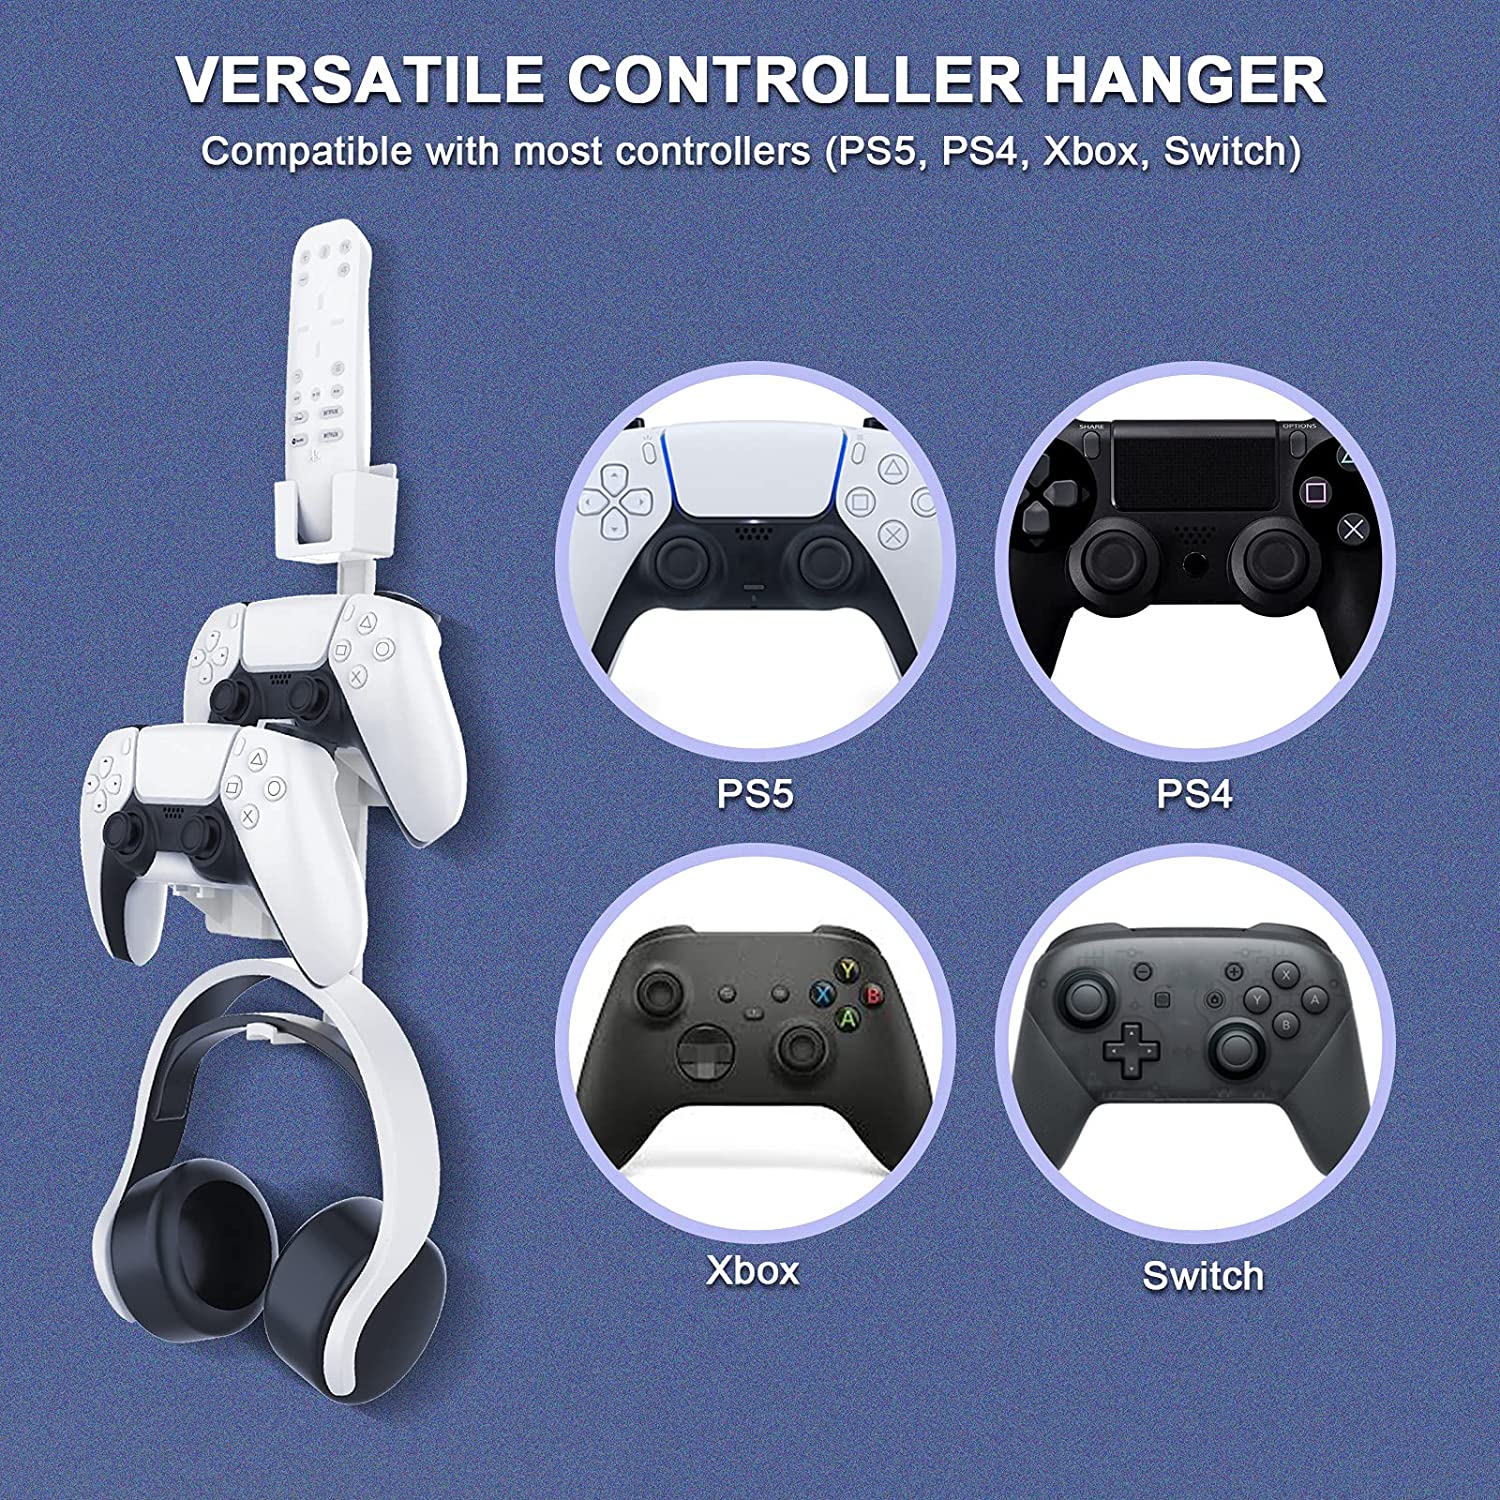 Included multi-controller hanger, compatible with most controllers (PS5, PS4, Xbox, Switch).